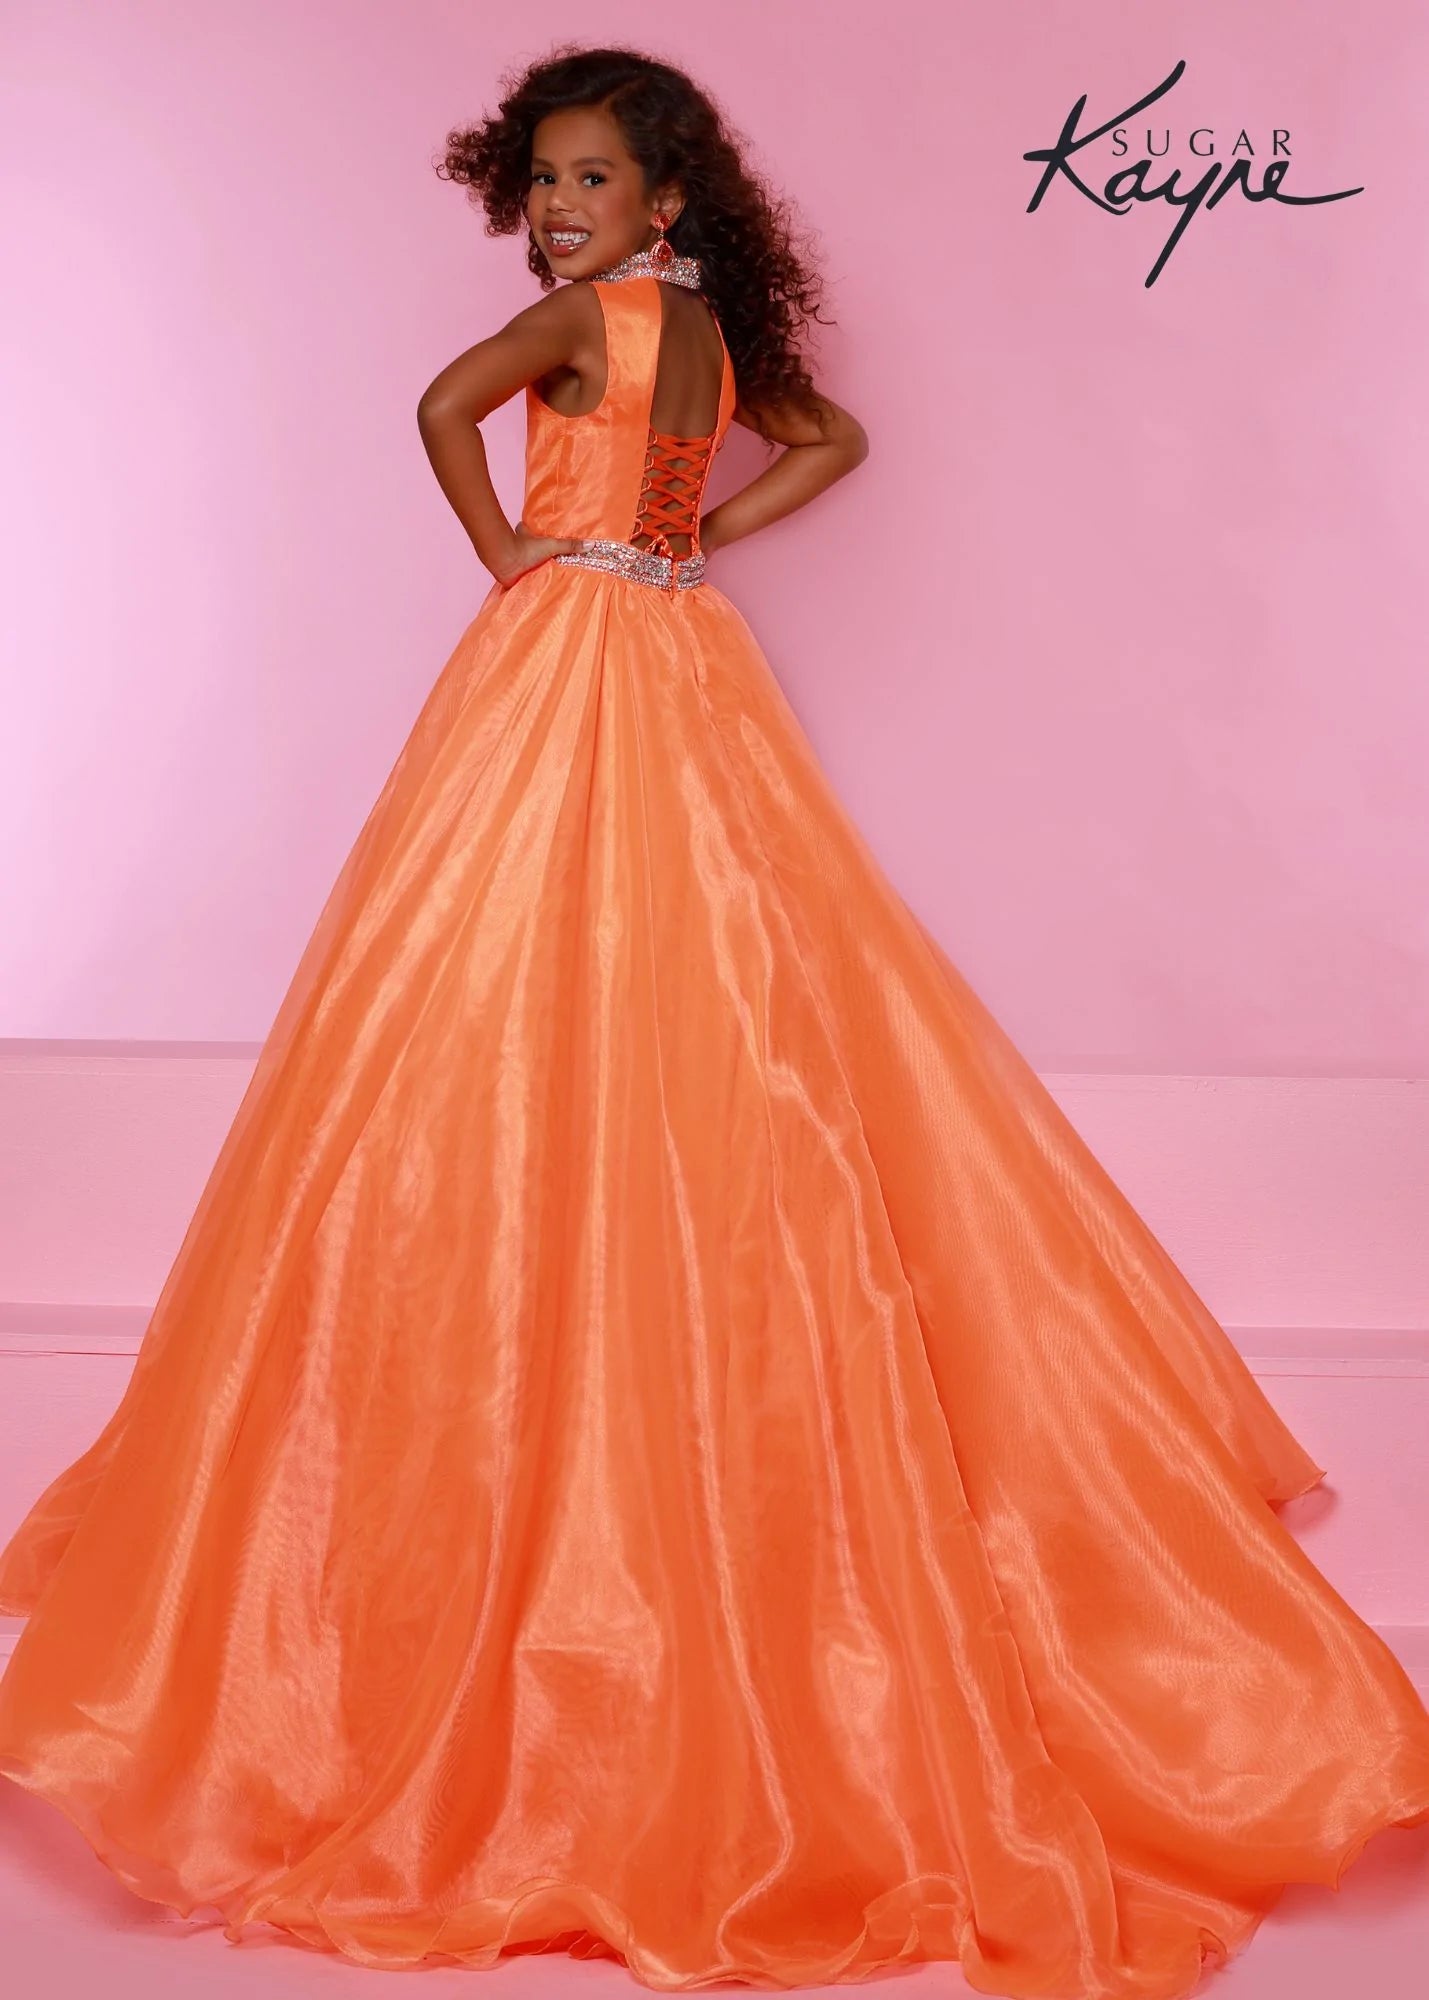 Sugar Kayne C317 Long Organza Girls A Line Pageant Dress High Neck Formal Gown Crystal Belt Simplistic but stunning! This organza ballgown features a hand-beaded collar and waist band to add a little sparkle to stun the crowd. The corset back is great as you grow! Open Back Corset  Colors: Barbie Pink, Carribbean, Ruby Red, Tangerine  Sizes: 2, 4, 6, 8, 10, 12, 14, 16  Fabric Organza, Satin Lining